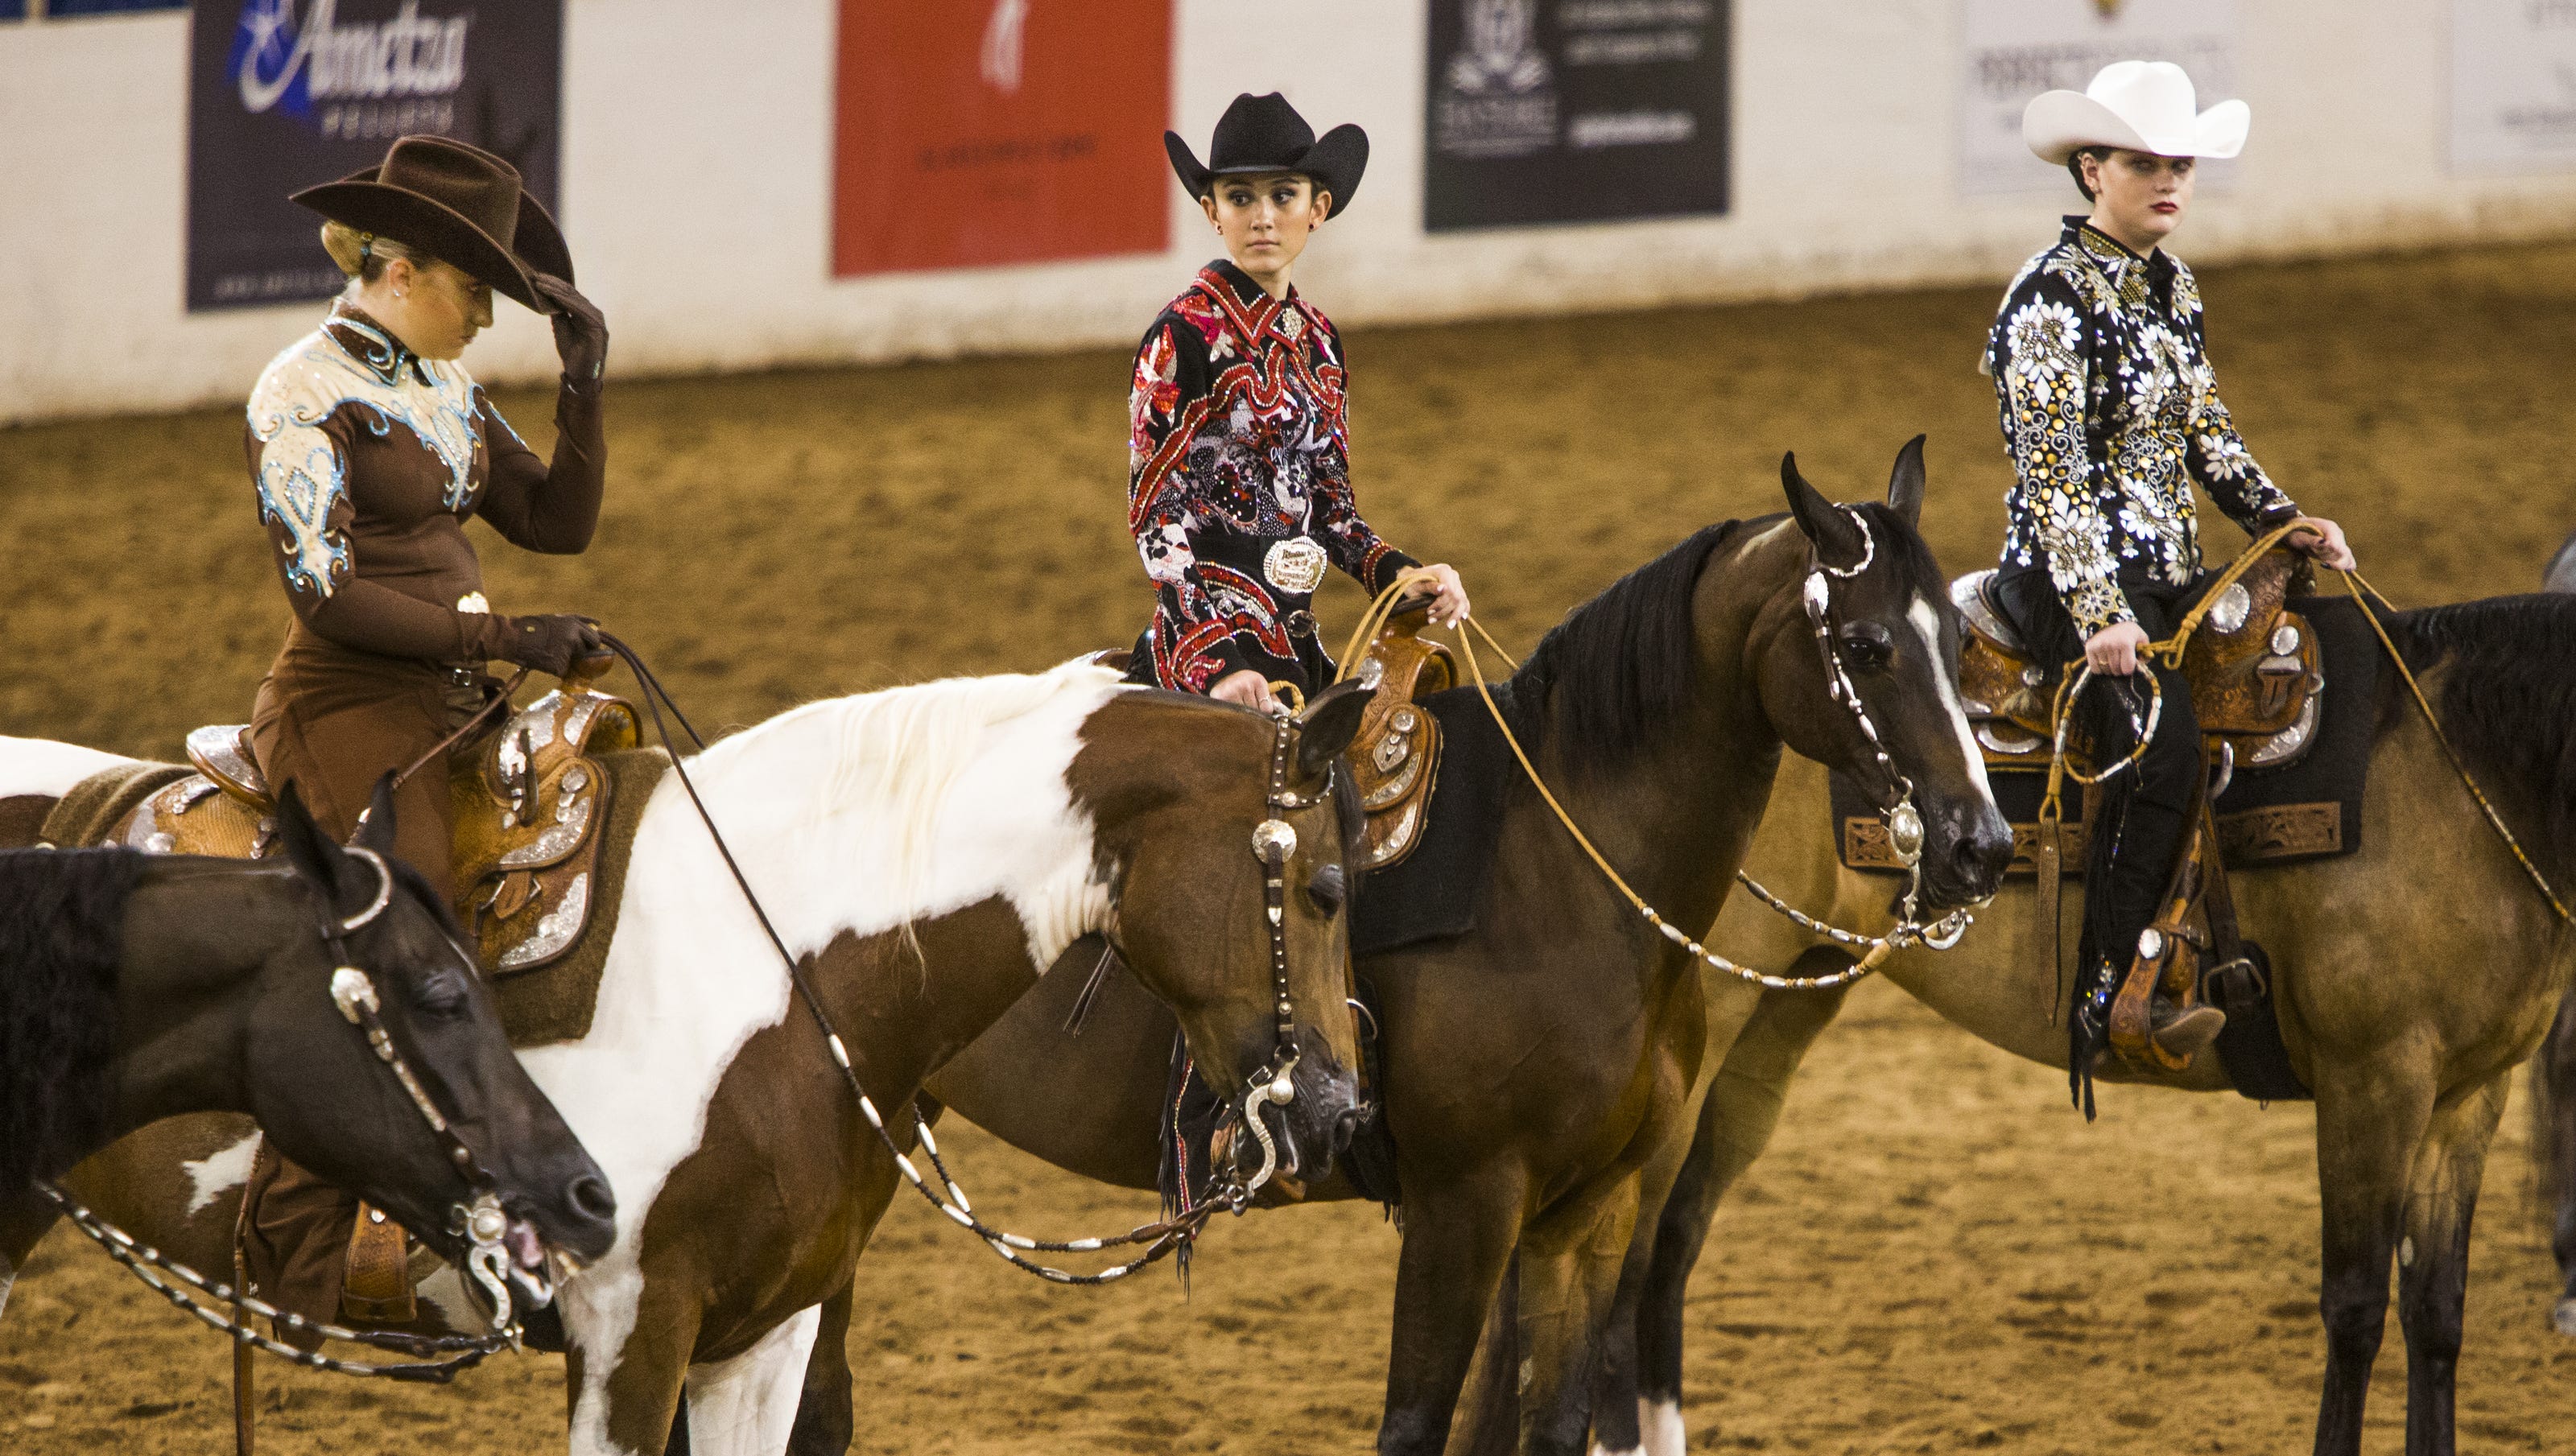 7 reasons to ride out to the Scottsdale Arabian Horse Show